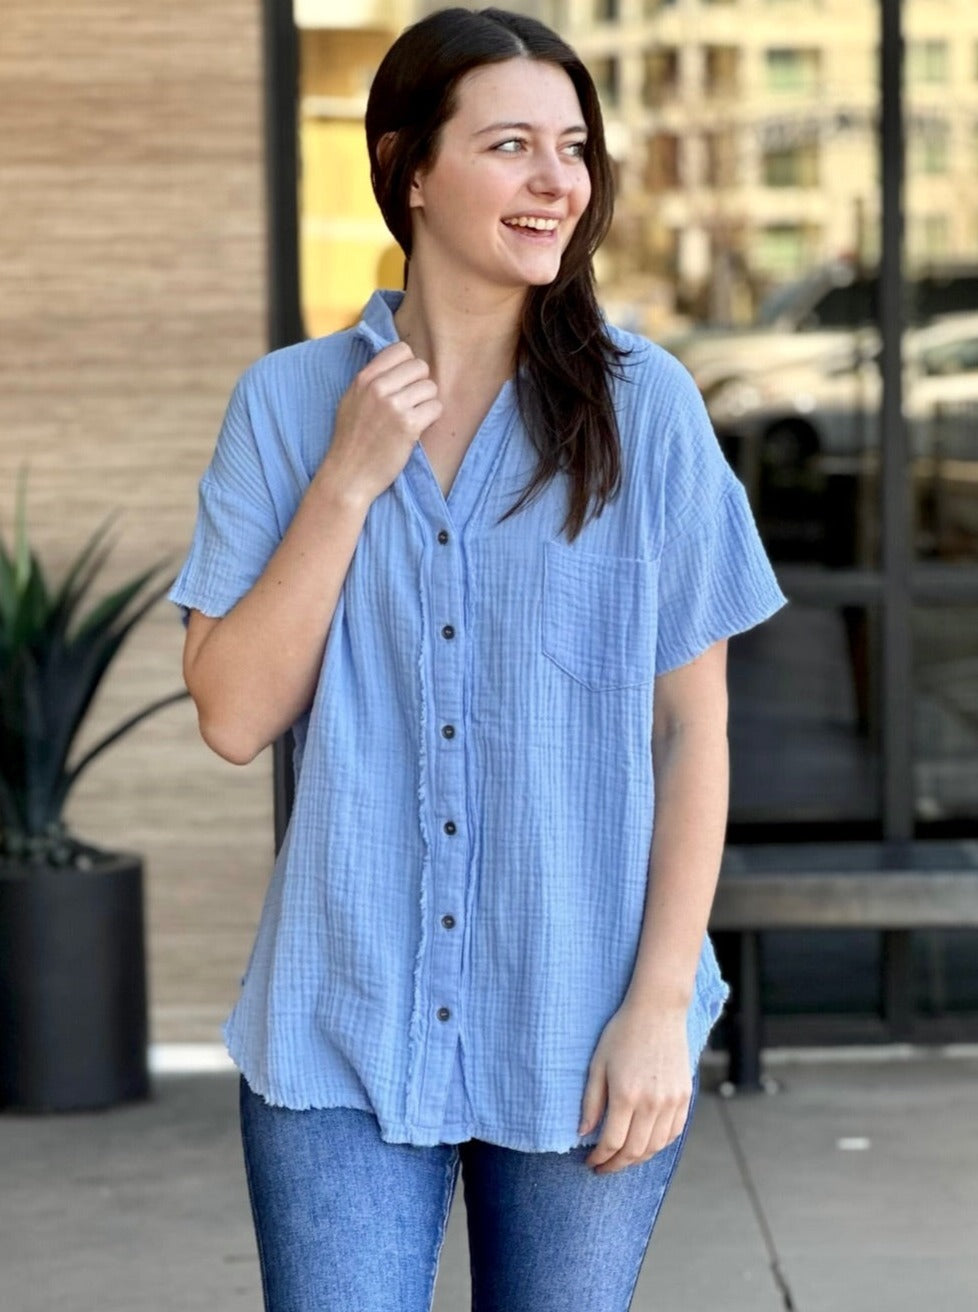 Megan in spring blue shirt front view holding collar